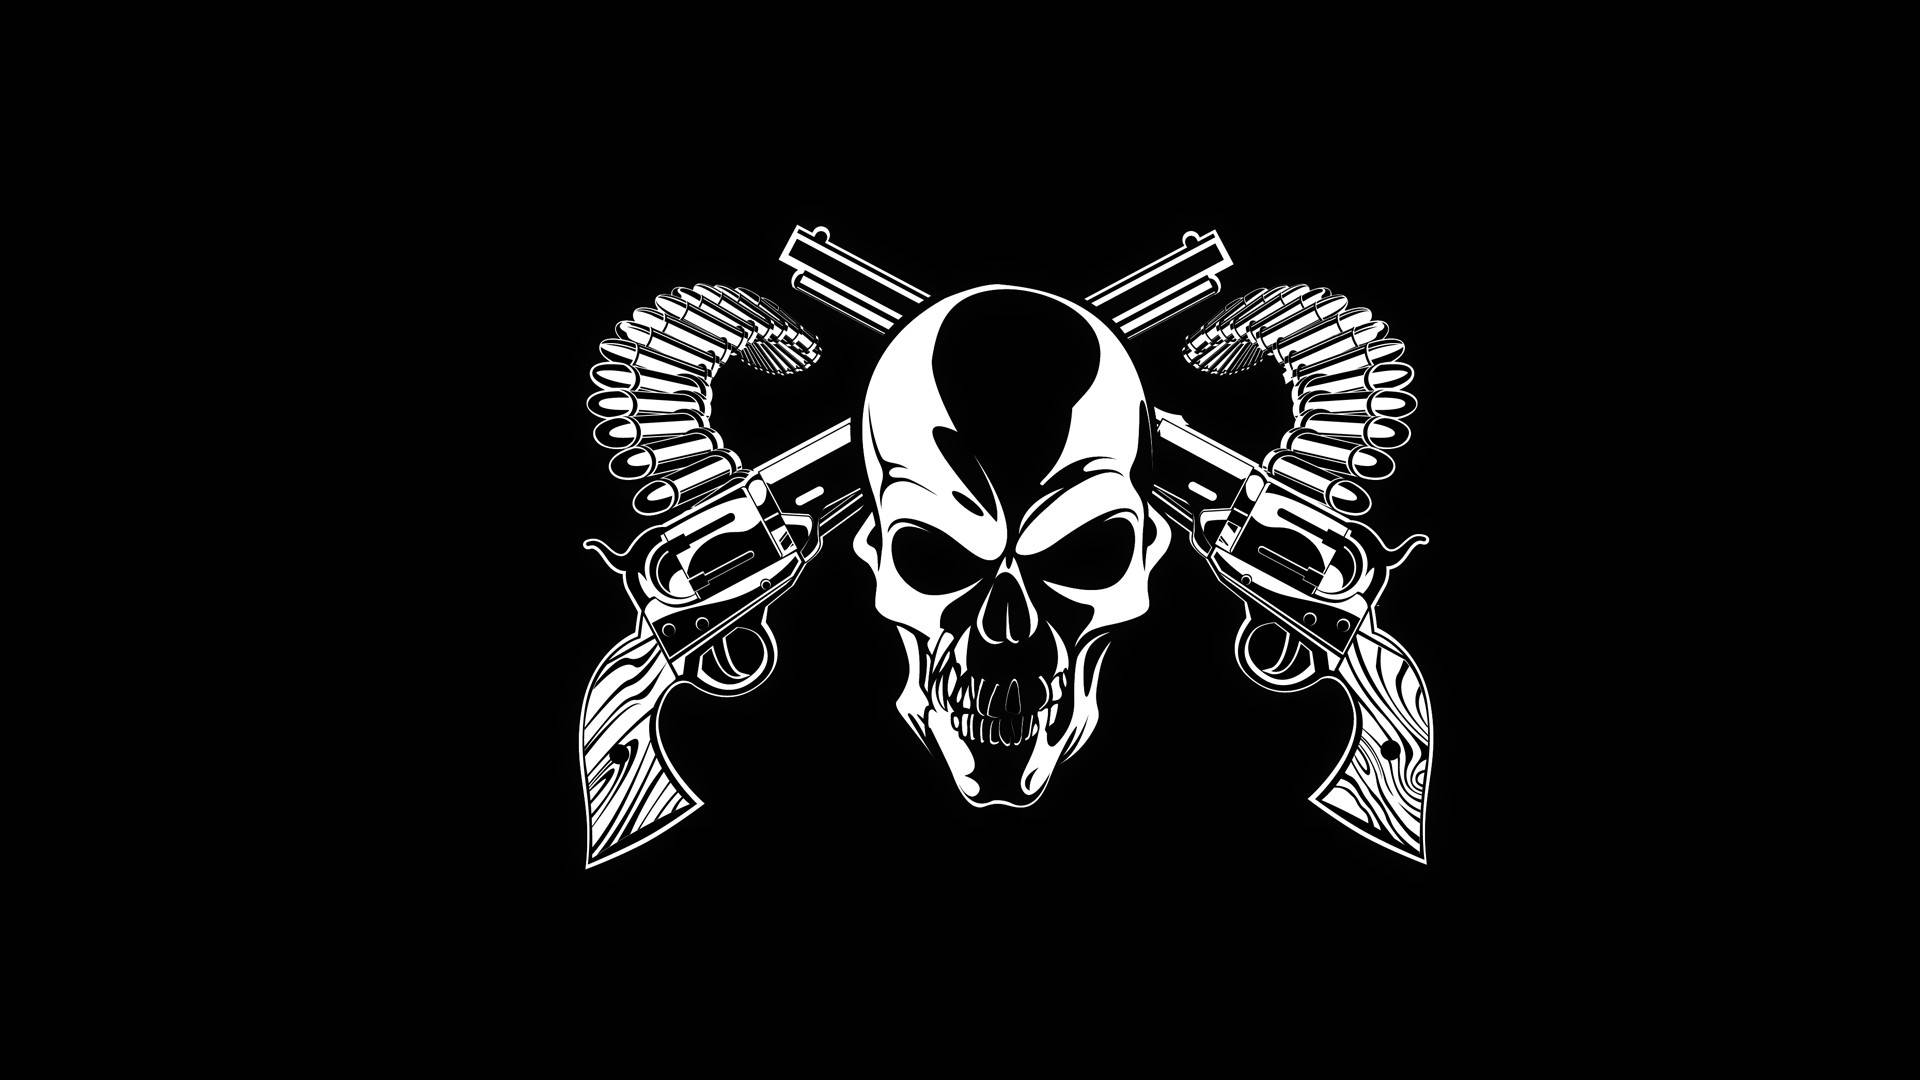 Hd Skull With Twin Guns Background